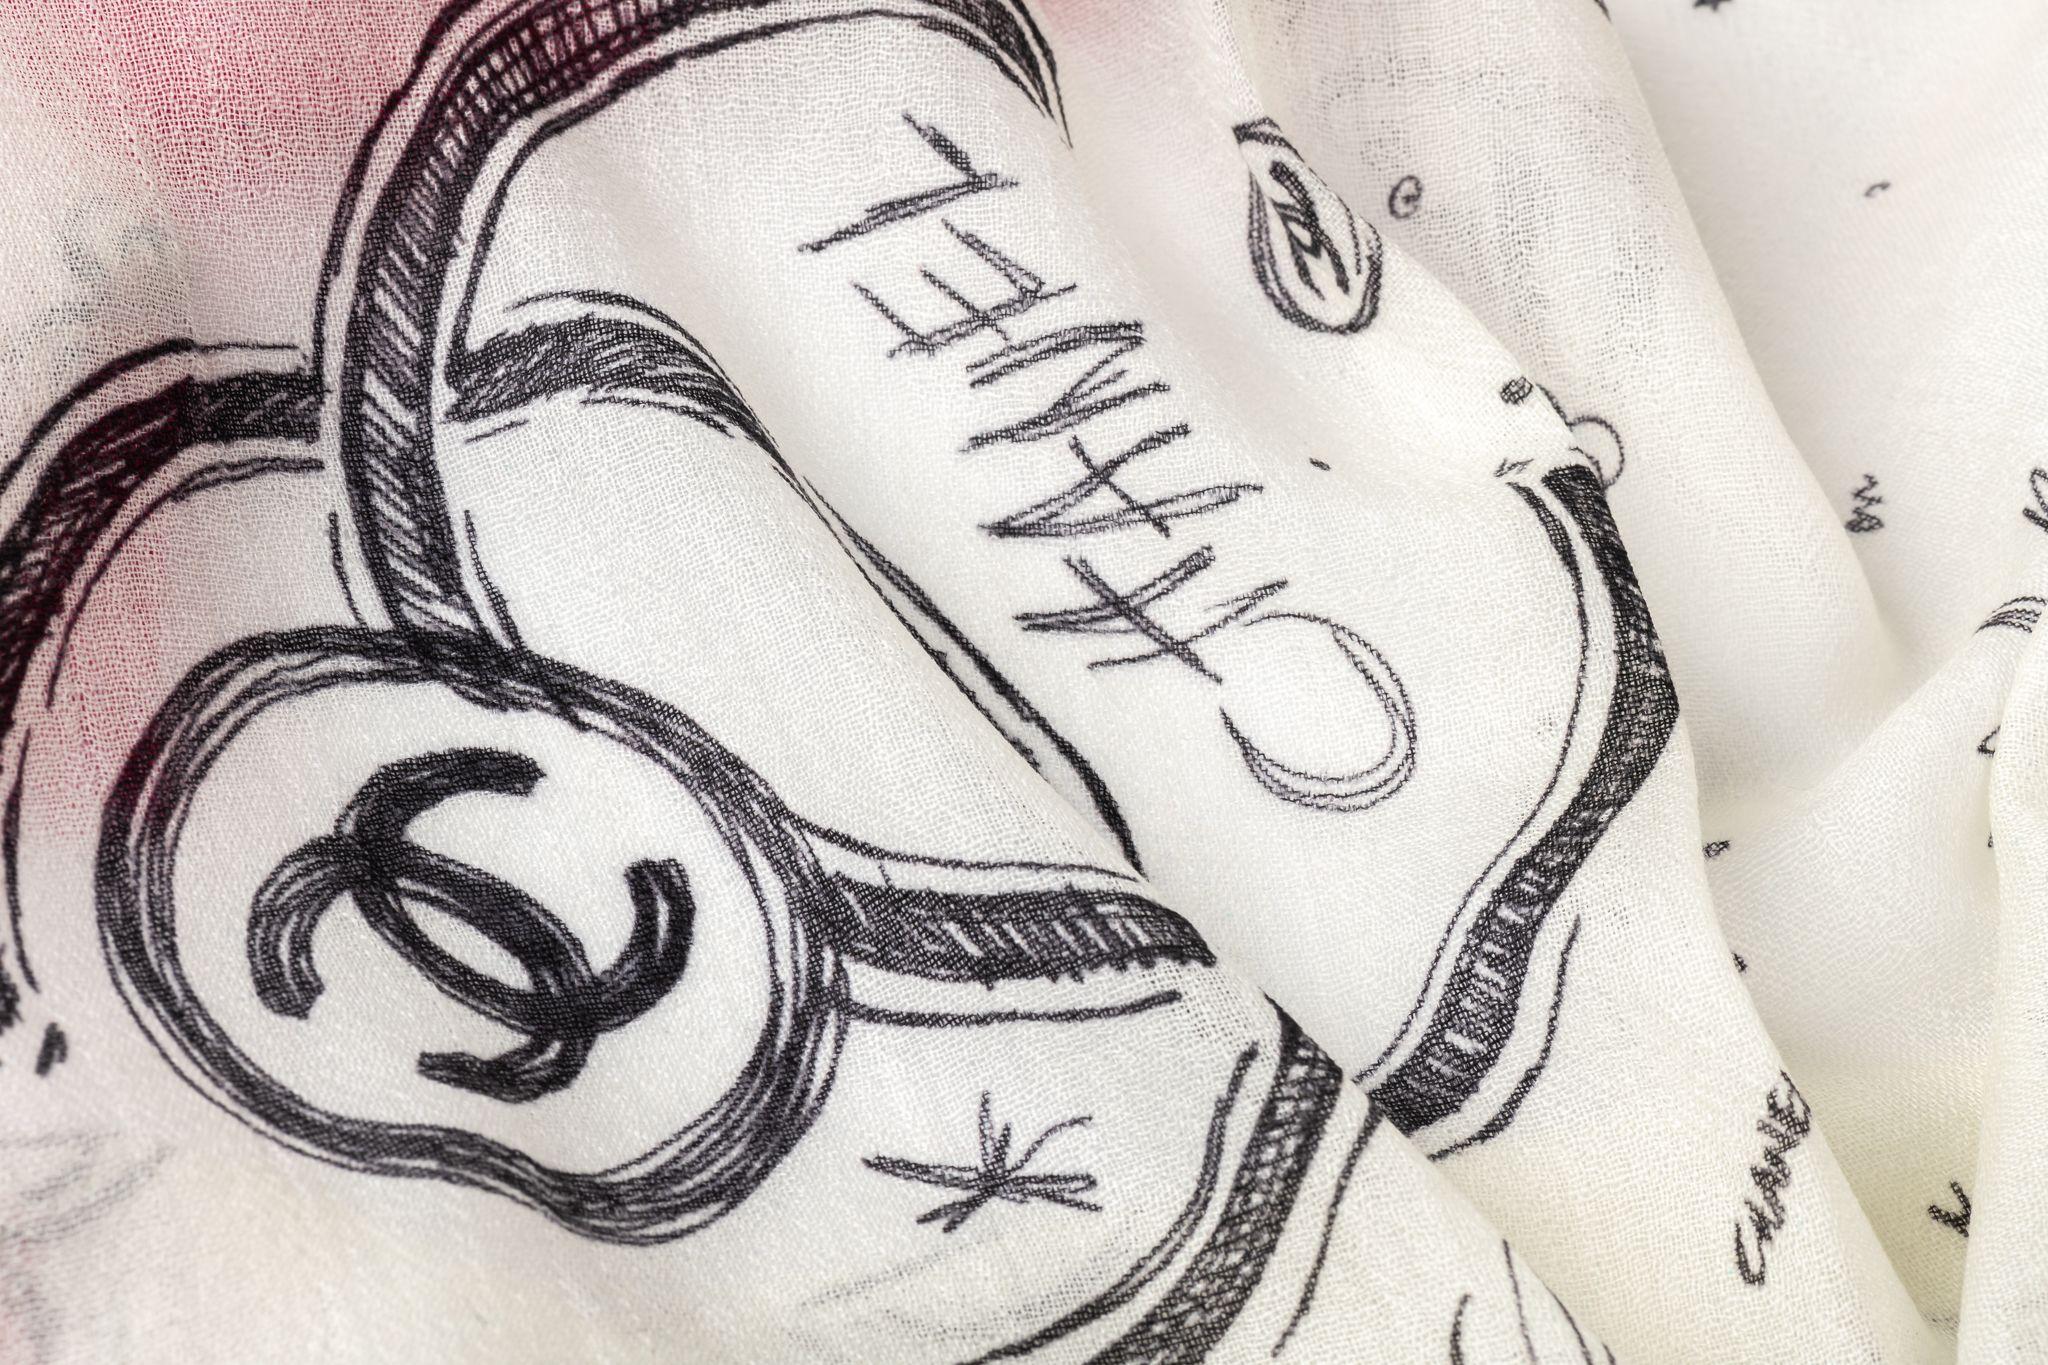 Chanel new cashmere shawl in white with fuchsia trim. Black logo drawings. Care tag attached.